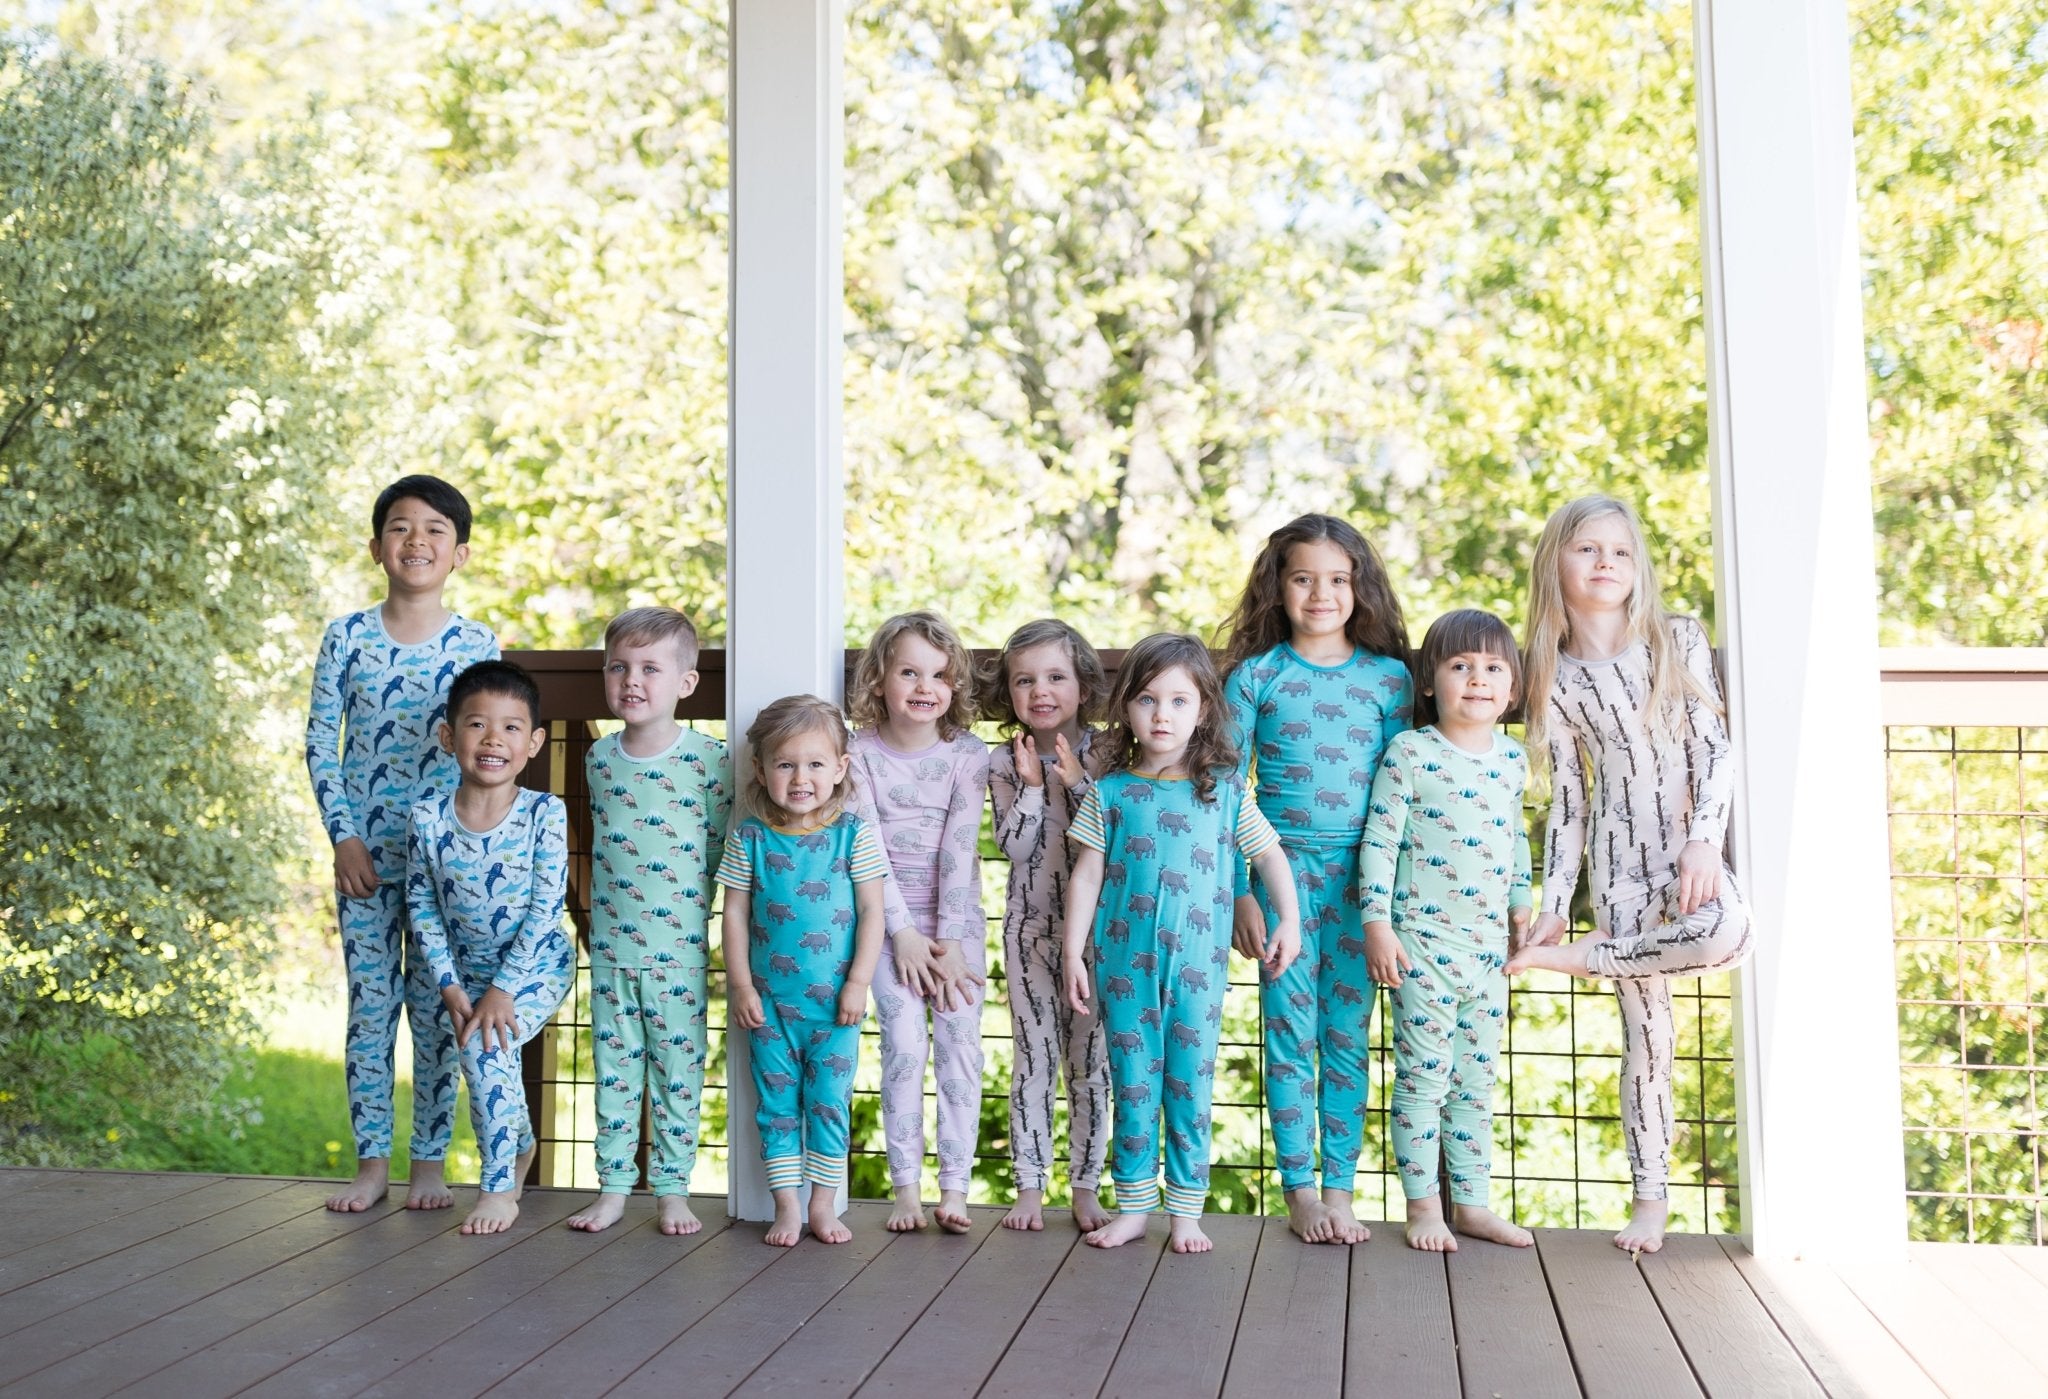 What Should a Kid Wear on Pajama Day? Pajama Day Ideas for Children - Free Birdees